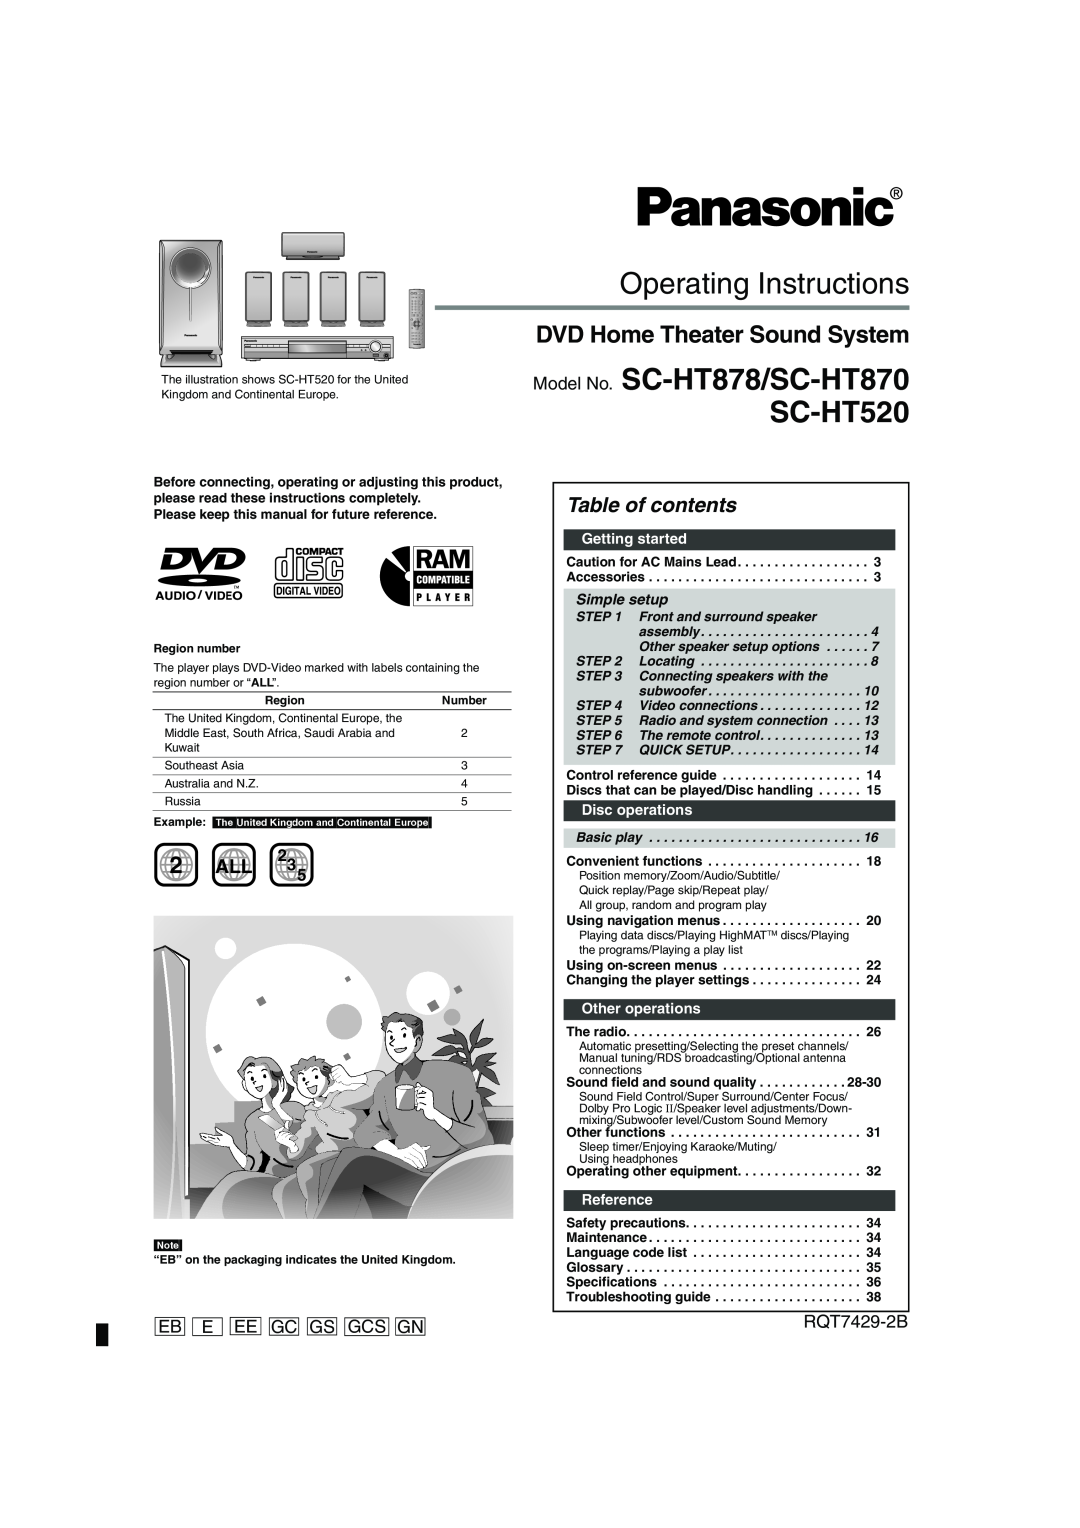 Panasonic GCSEB E specifications Operating Instructions, DVD Home Theater Sound System, Eb E Ee Gcgsgcs Gn, RQT7429-2B 